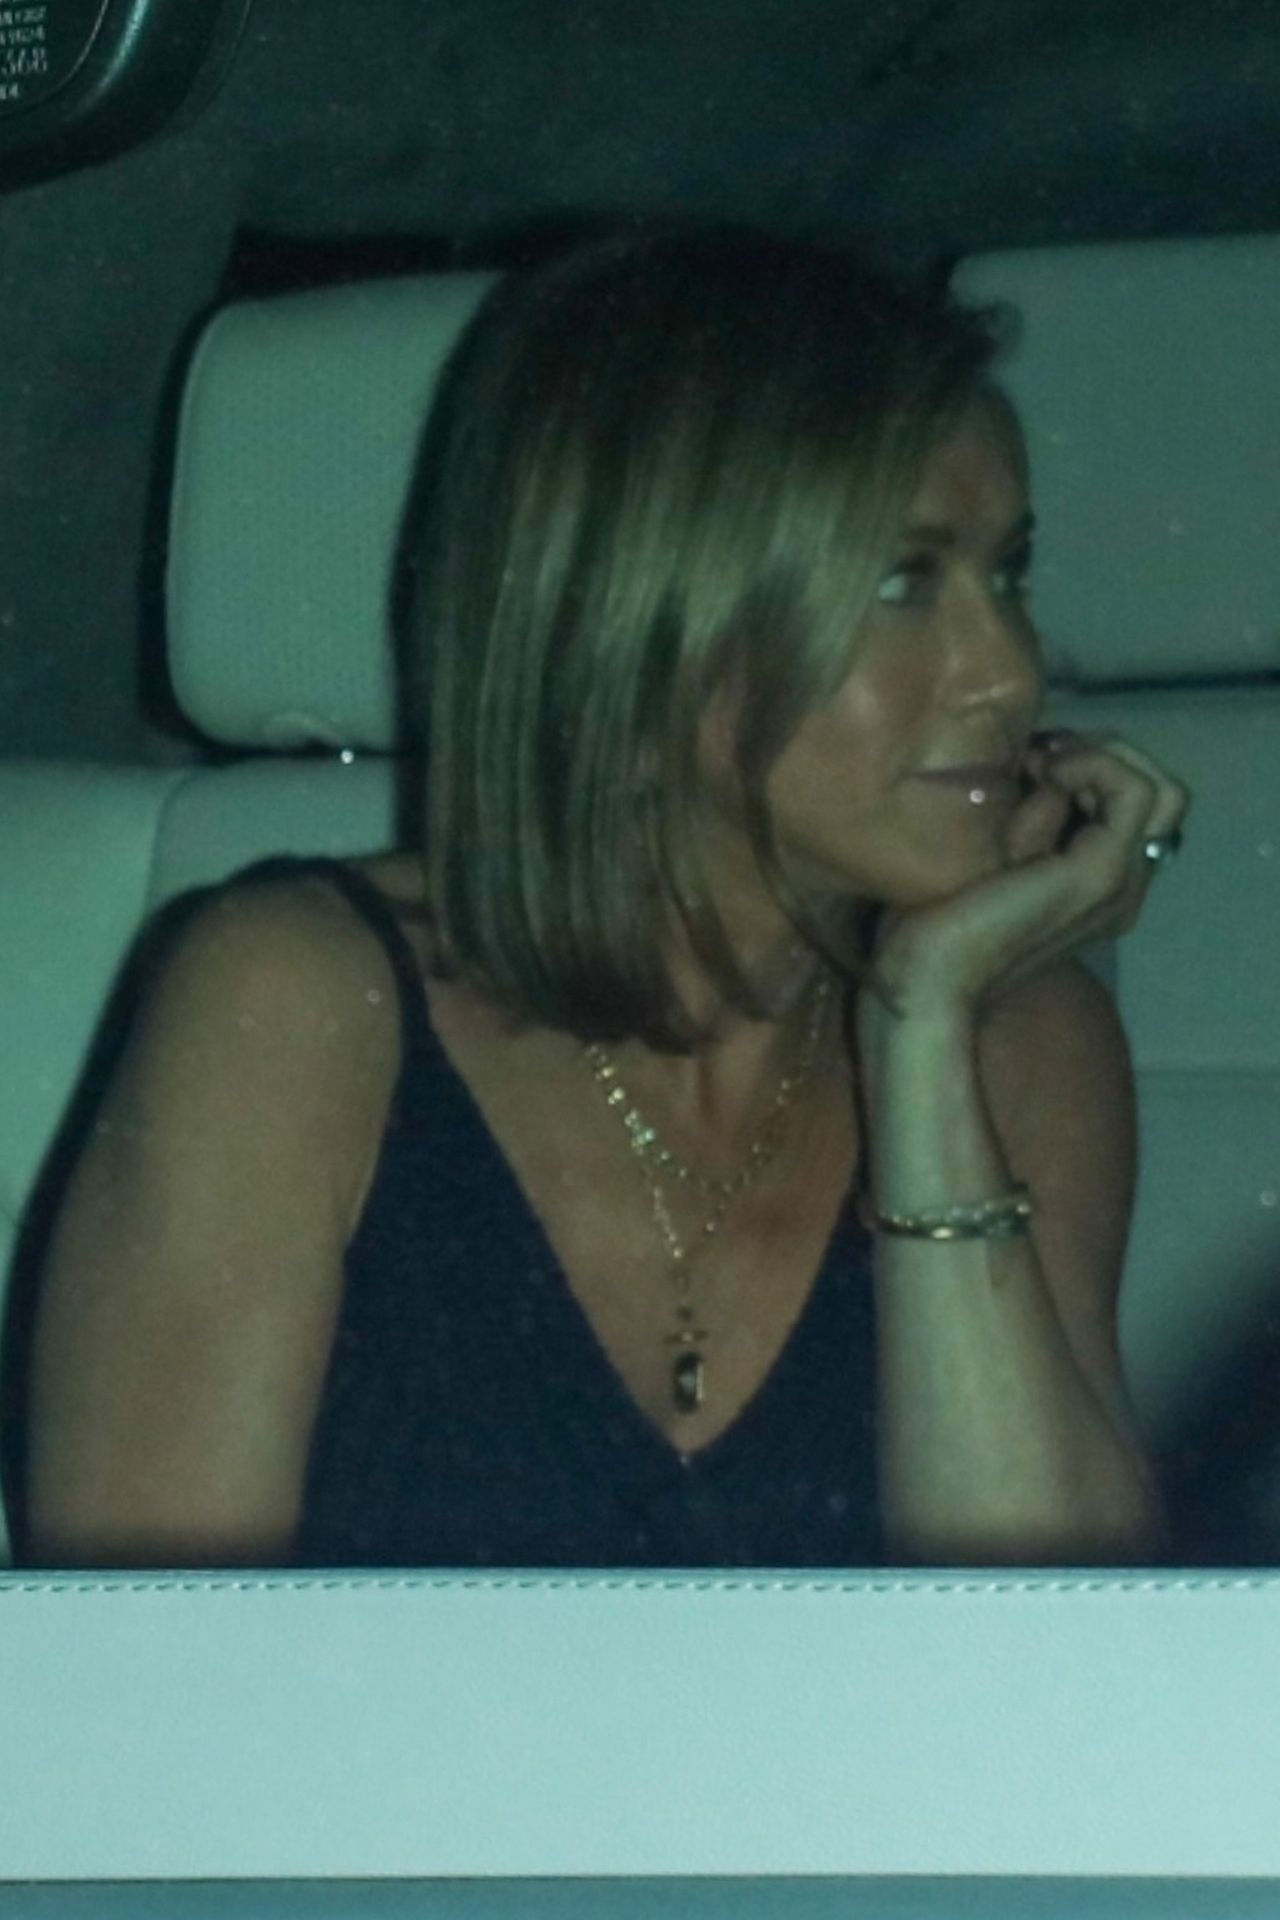 Jennifer Aniston and Courteney Cox "caught" together at dinner